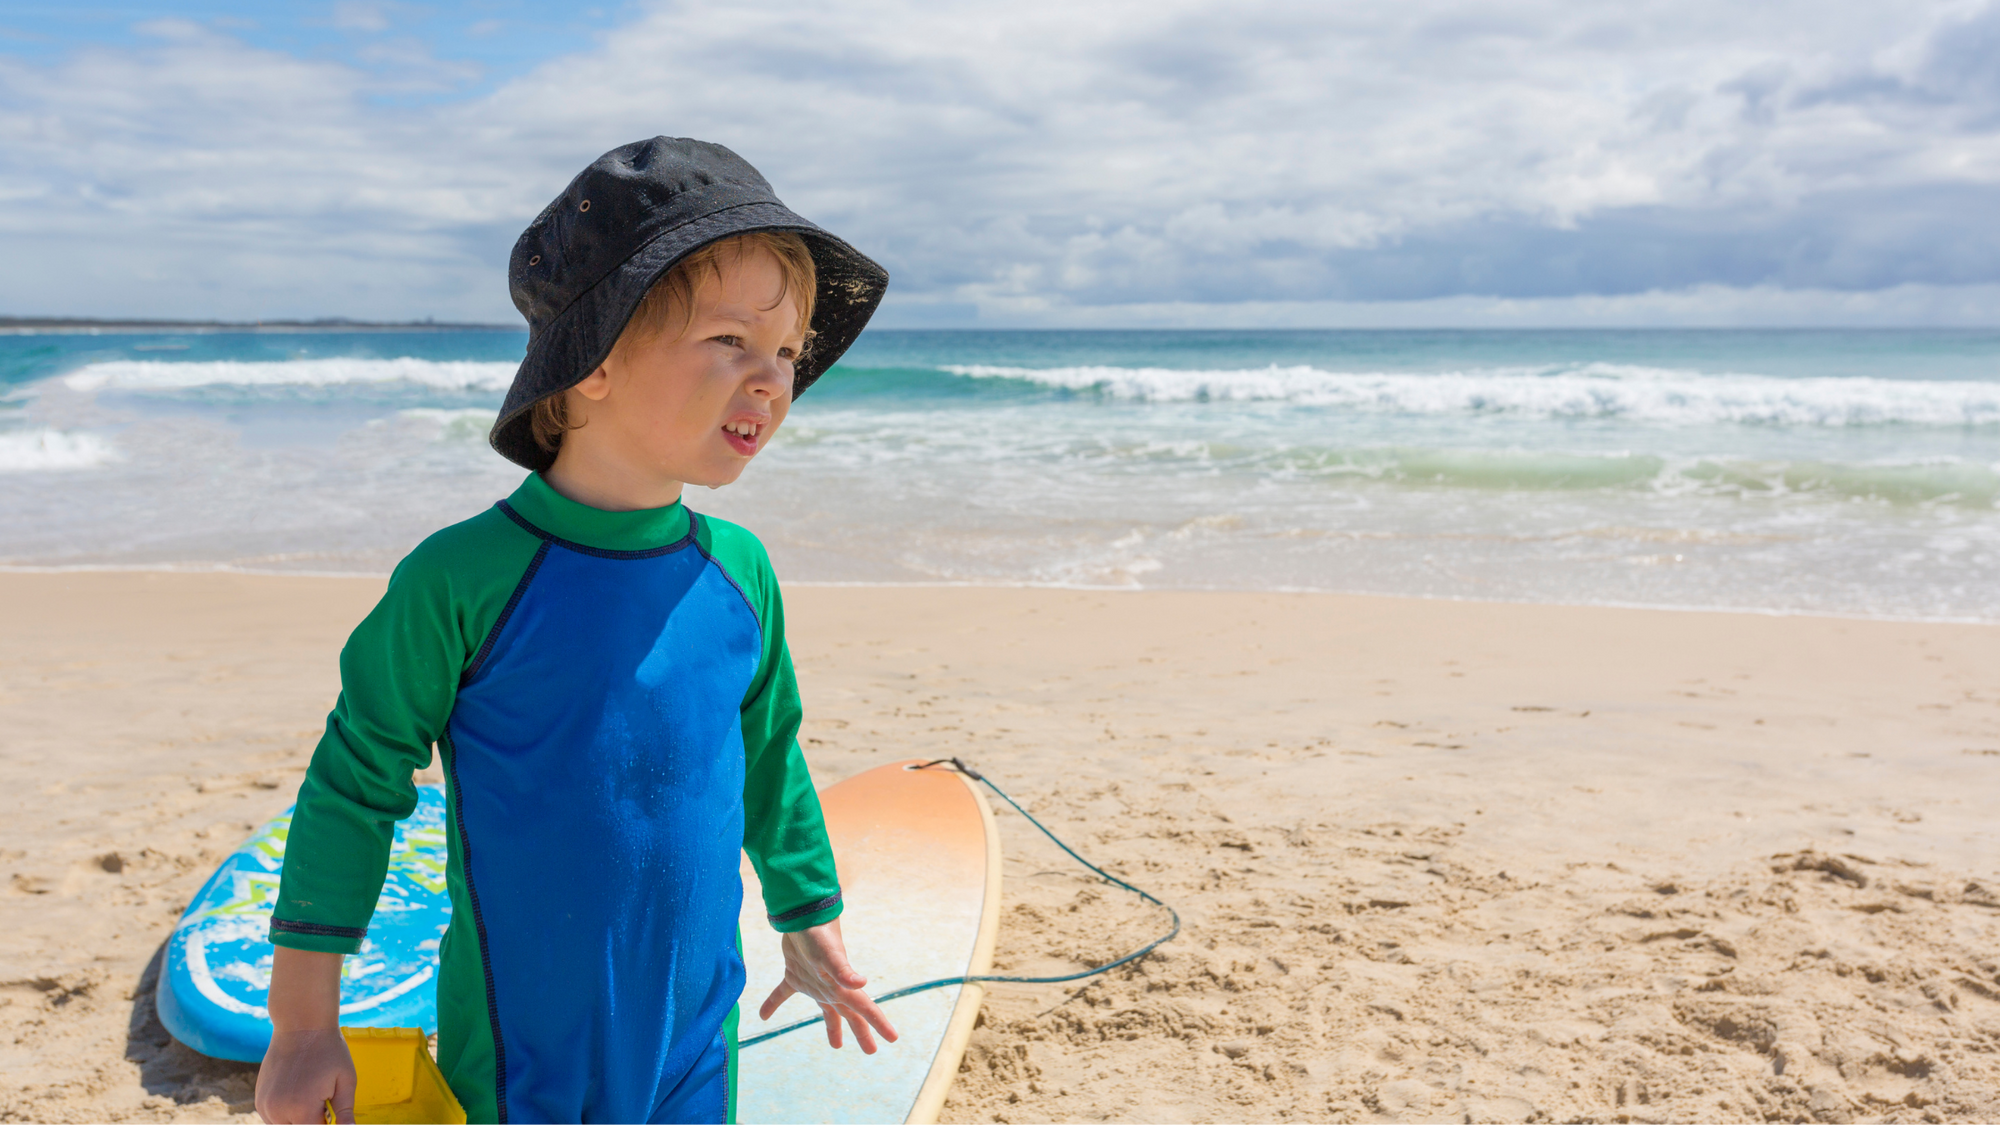 Sun protective clothing: Why it's worth it